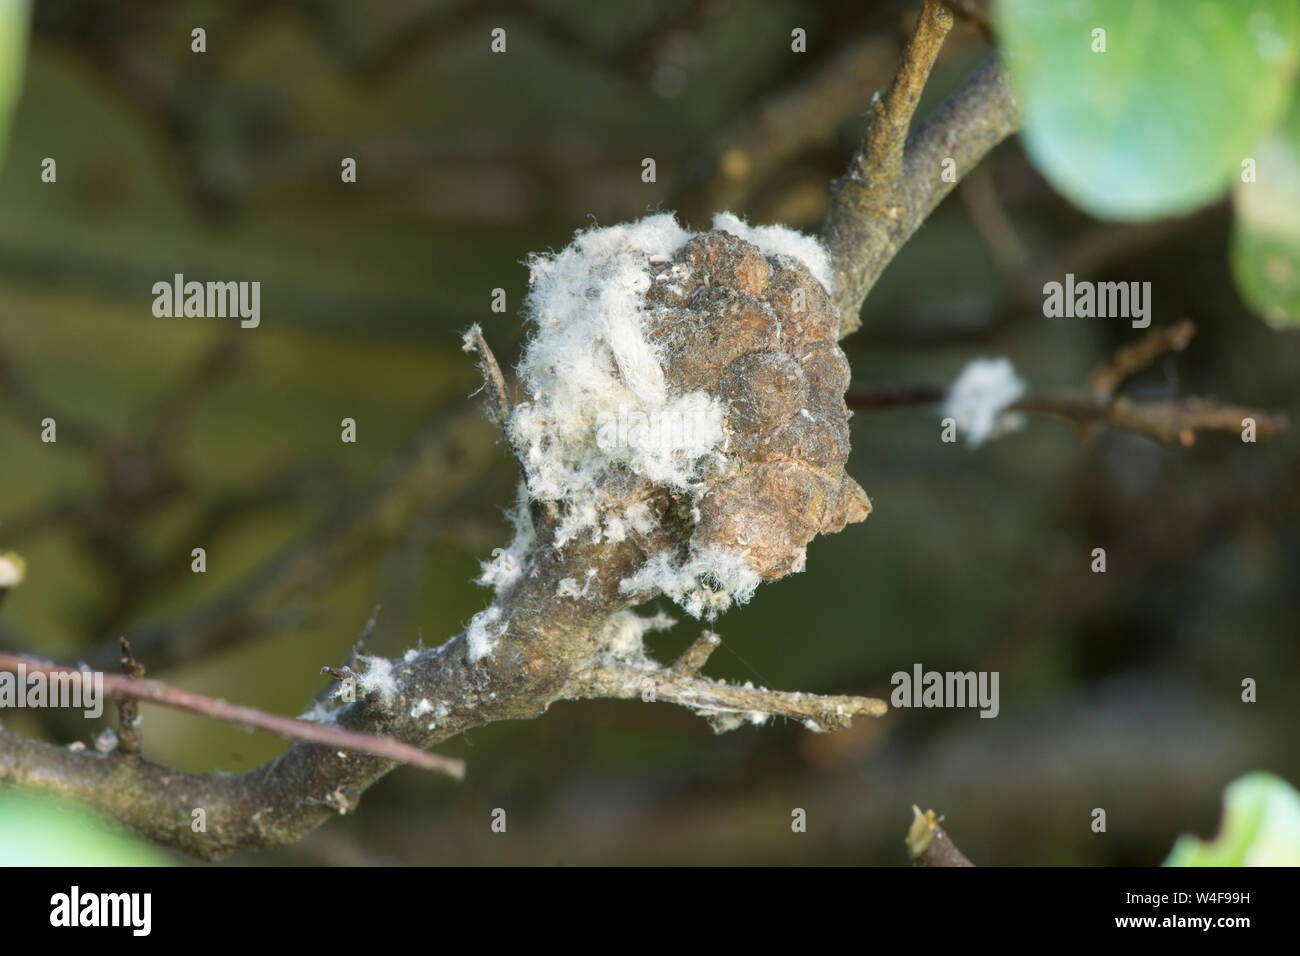 wooly aphid, American blight, Eriosoma lanigerum, on Pyracantha, garden peat, Sussex, UK, July Stock Photo